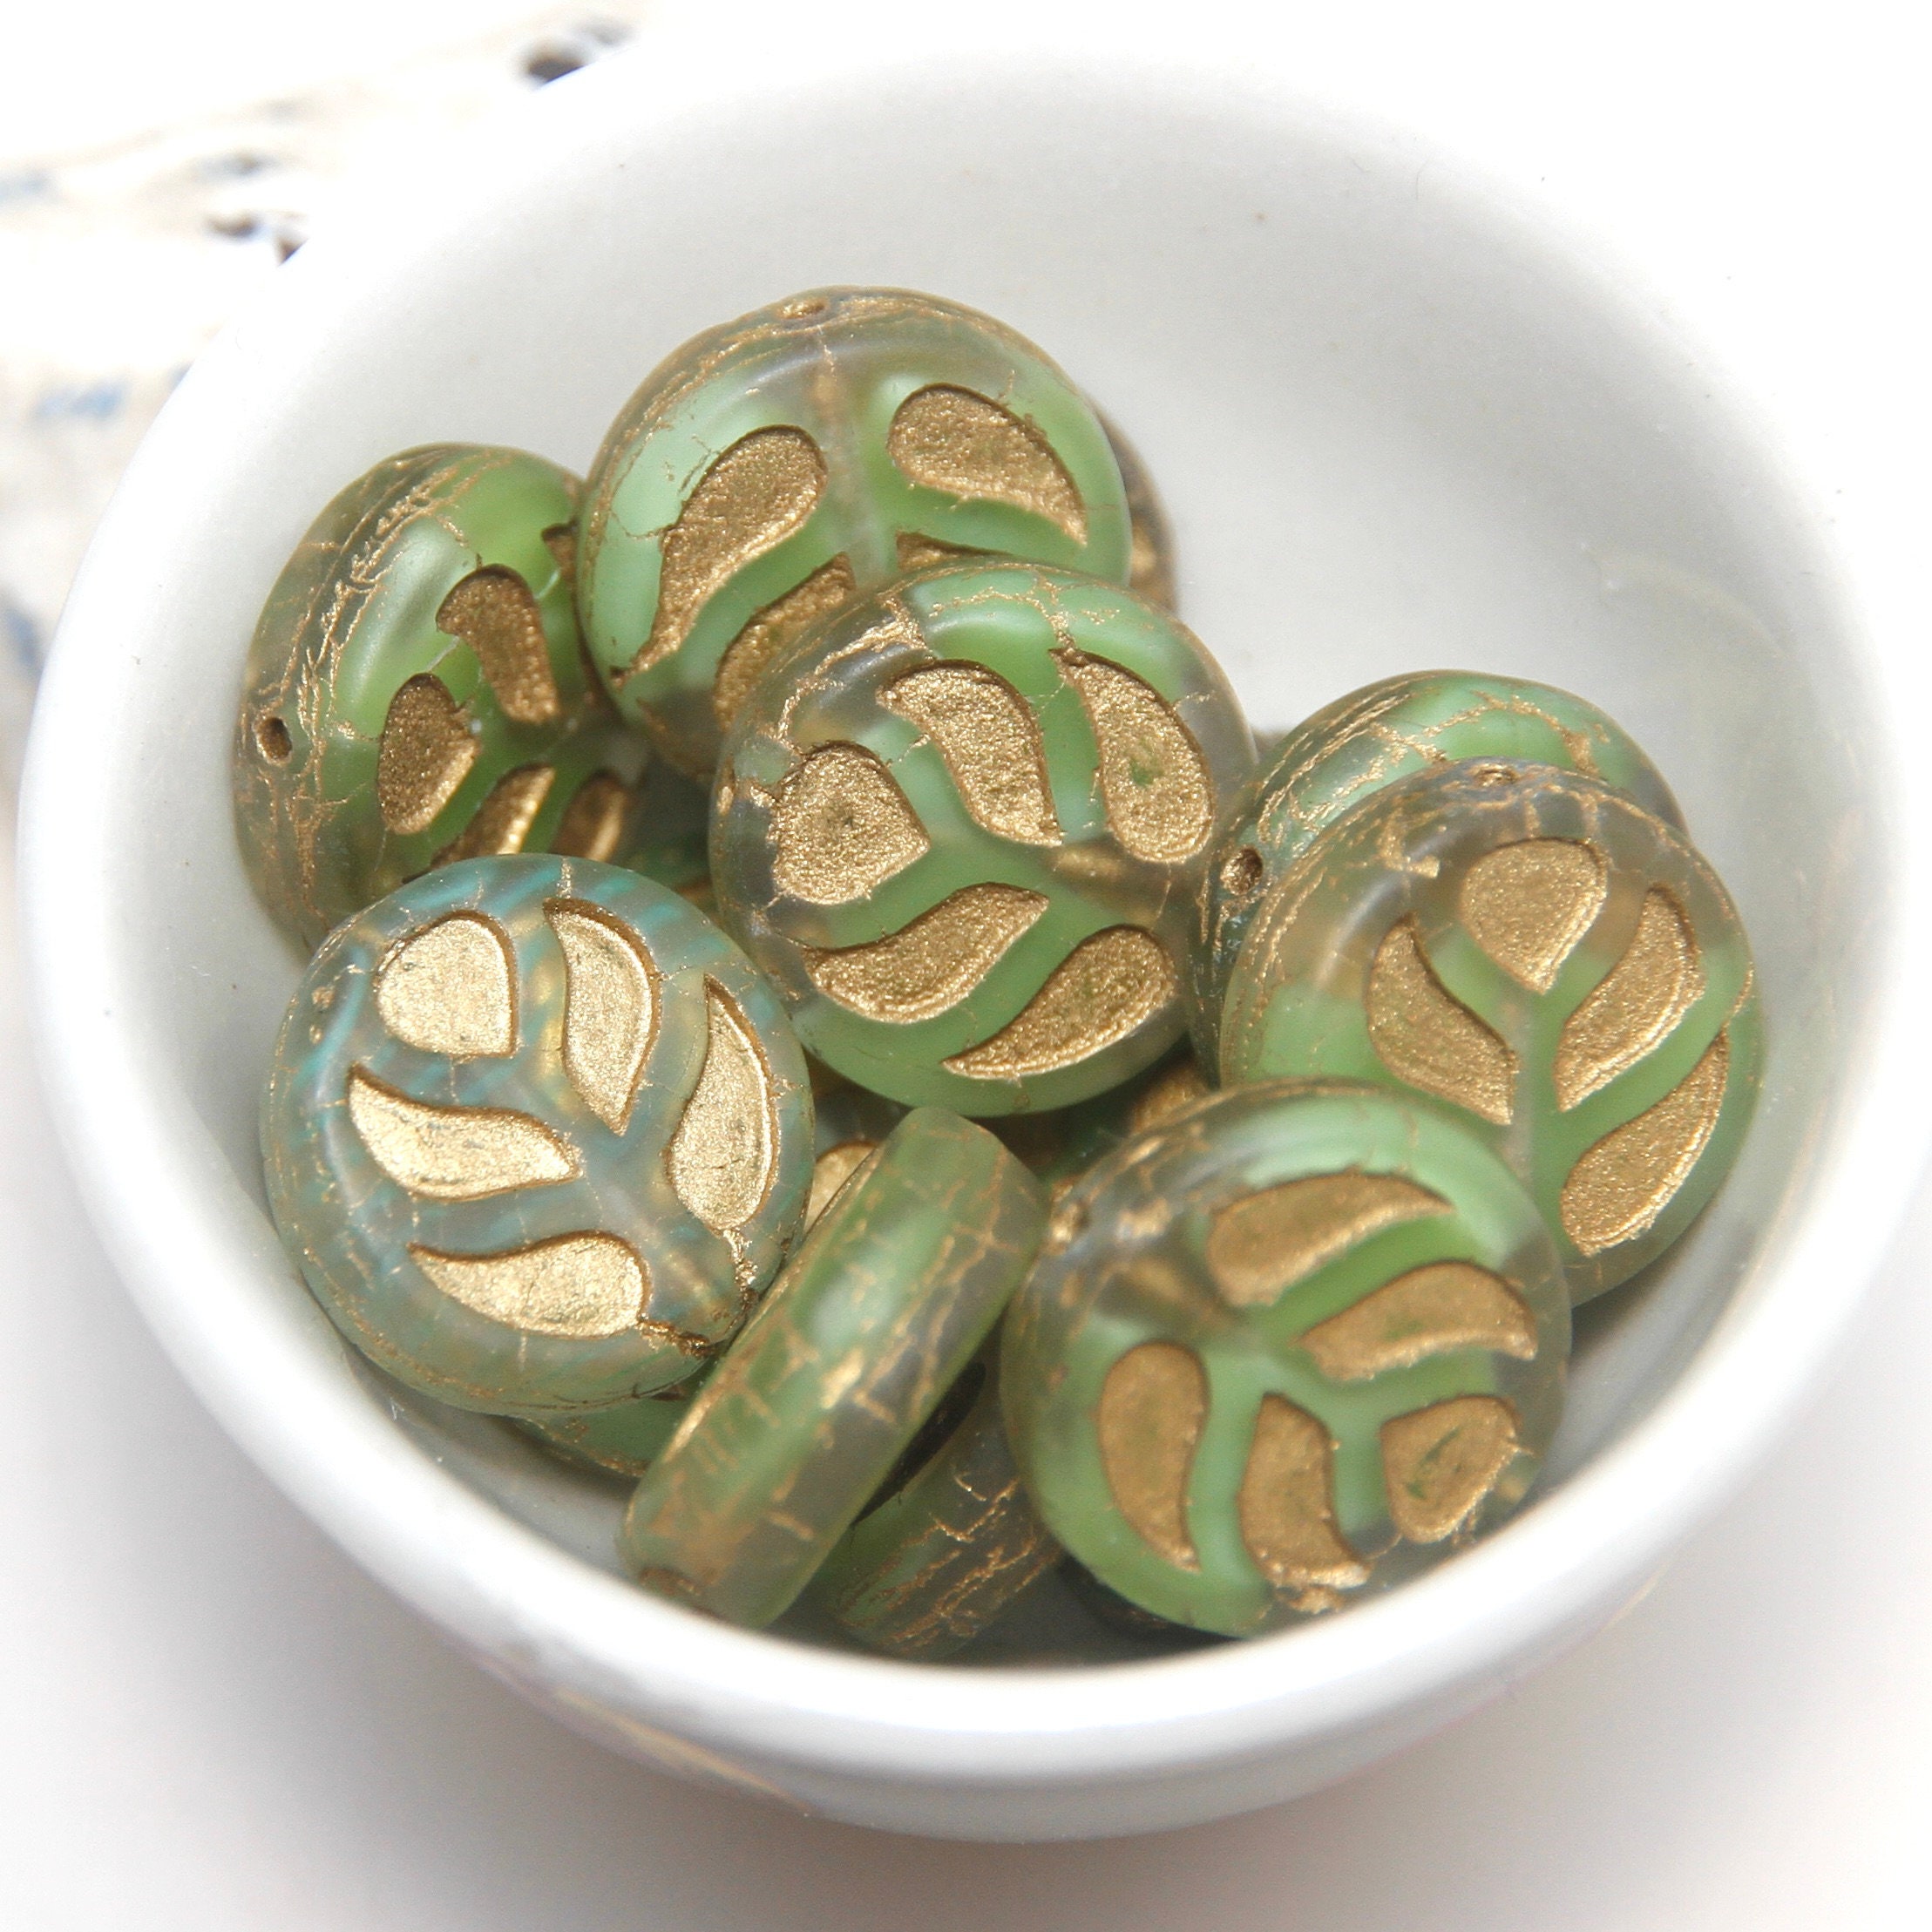 12x7mm Green Leaf Beads Golden Inlays Czech Glass Pressed Leaves